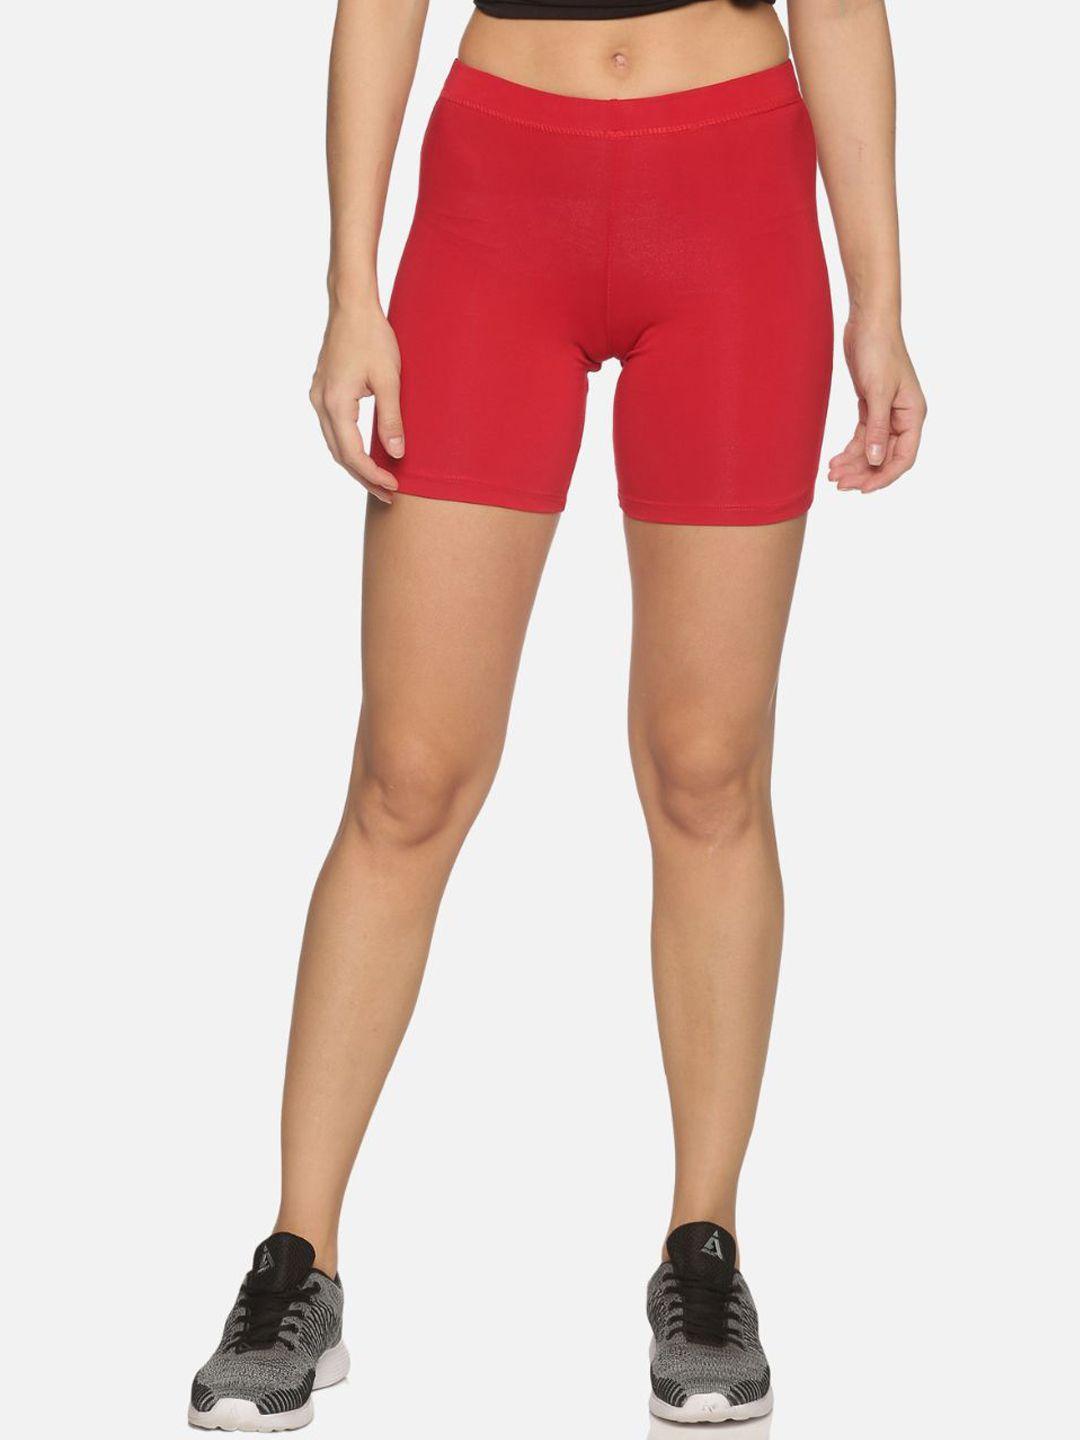 outflits-women-red-skinny-fit-cycling-sports-shorts